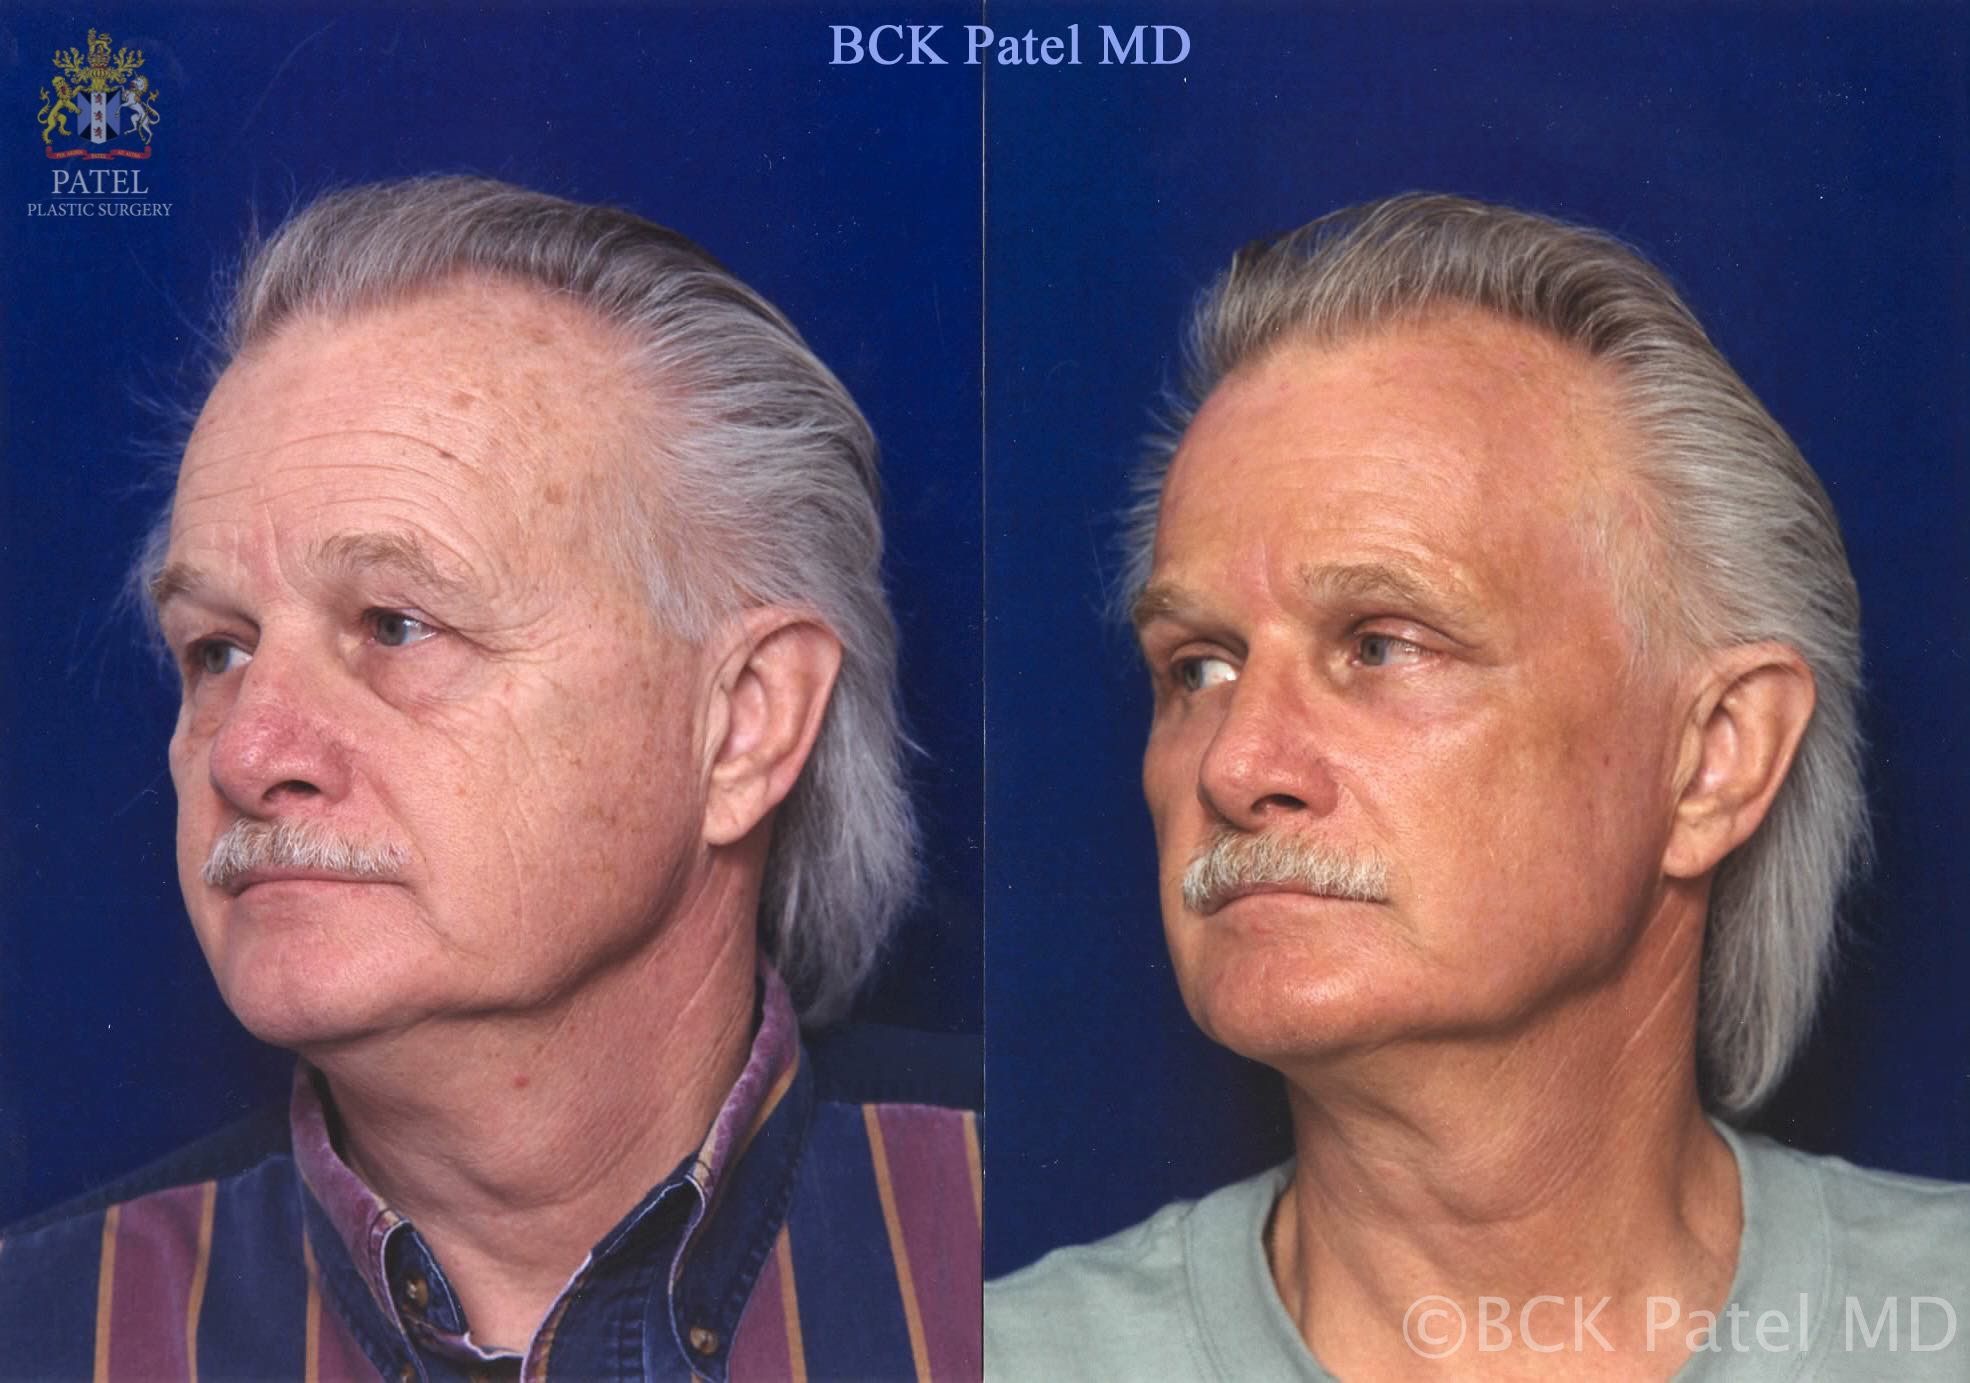 Hammock Lift in a male showing comprehensive improvement of the face by Dr. BCK Patel MD, FRCS of patelplasticsurgery.com of Salt Lake City and St. George Utah